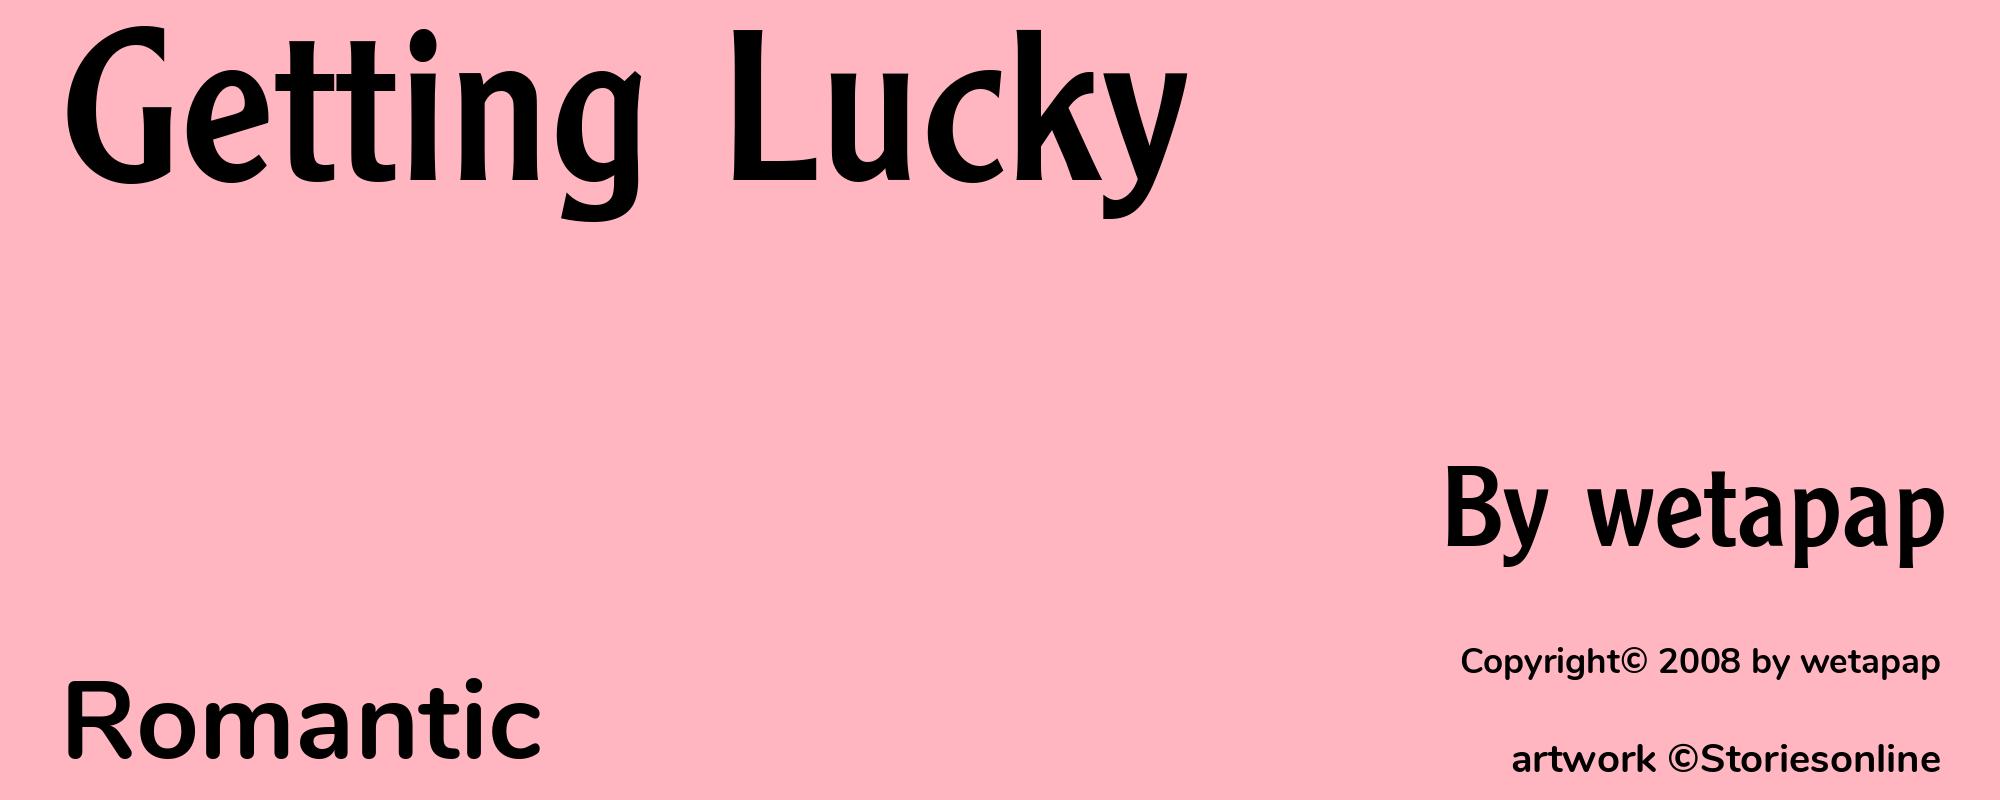 Getting Lucky - Cover